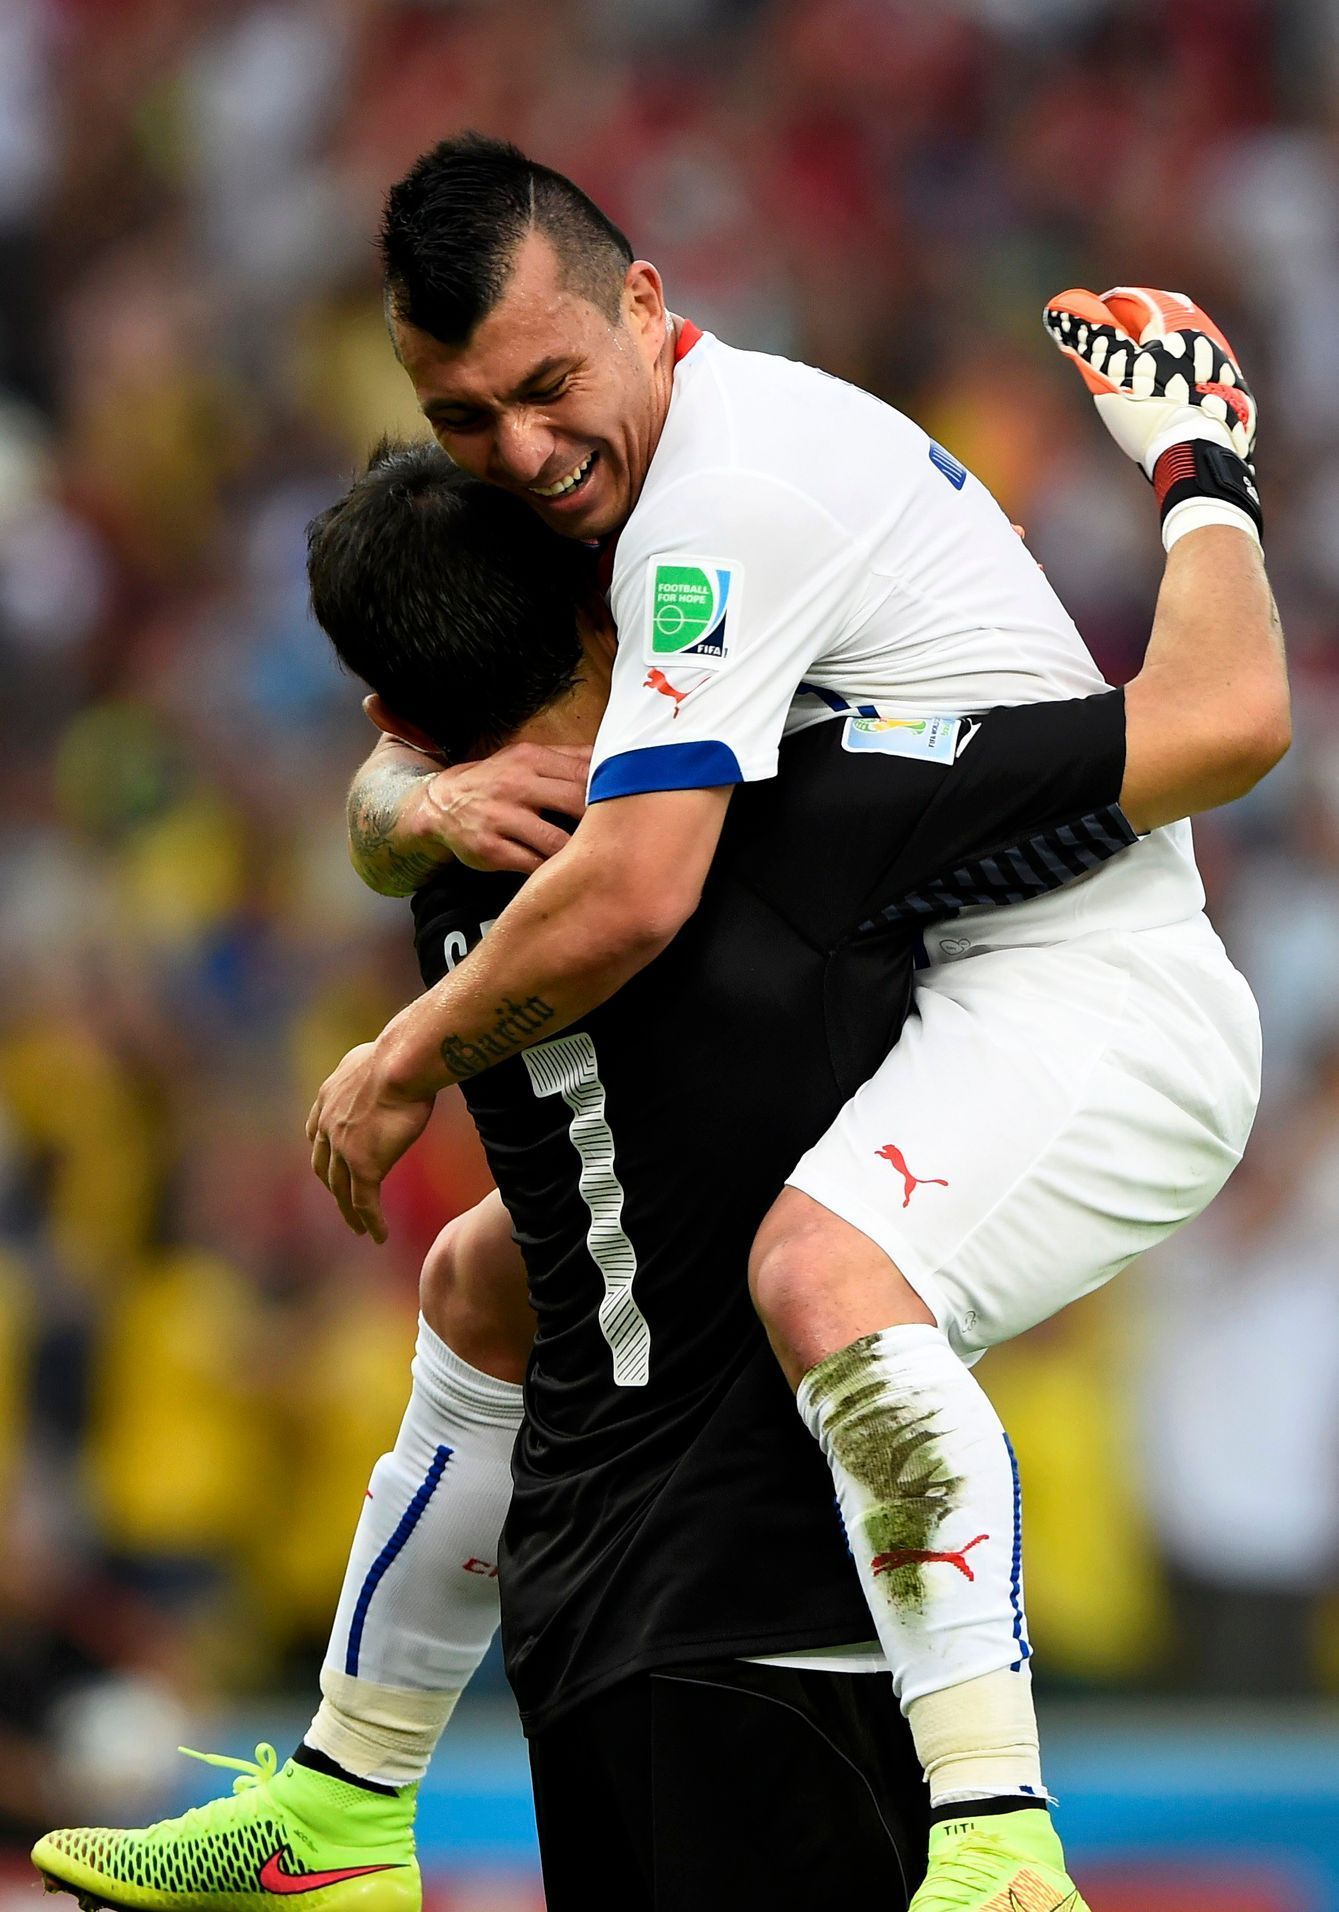 Chile's Medel hugs Bravo after the team scored their first goal against Spain during their 2014 World Cup Group B soccer match in Rio de Janeiro